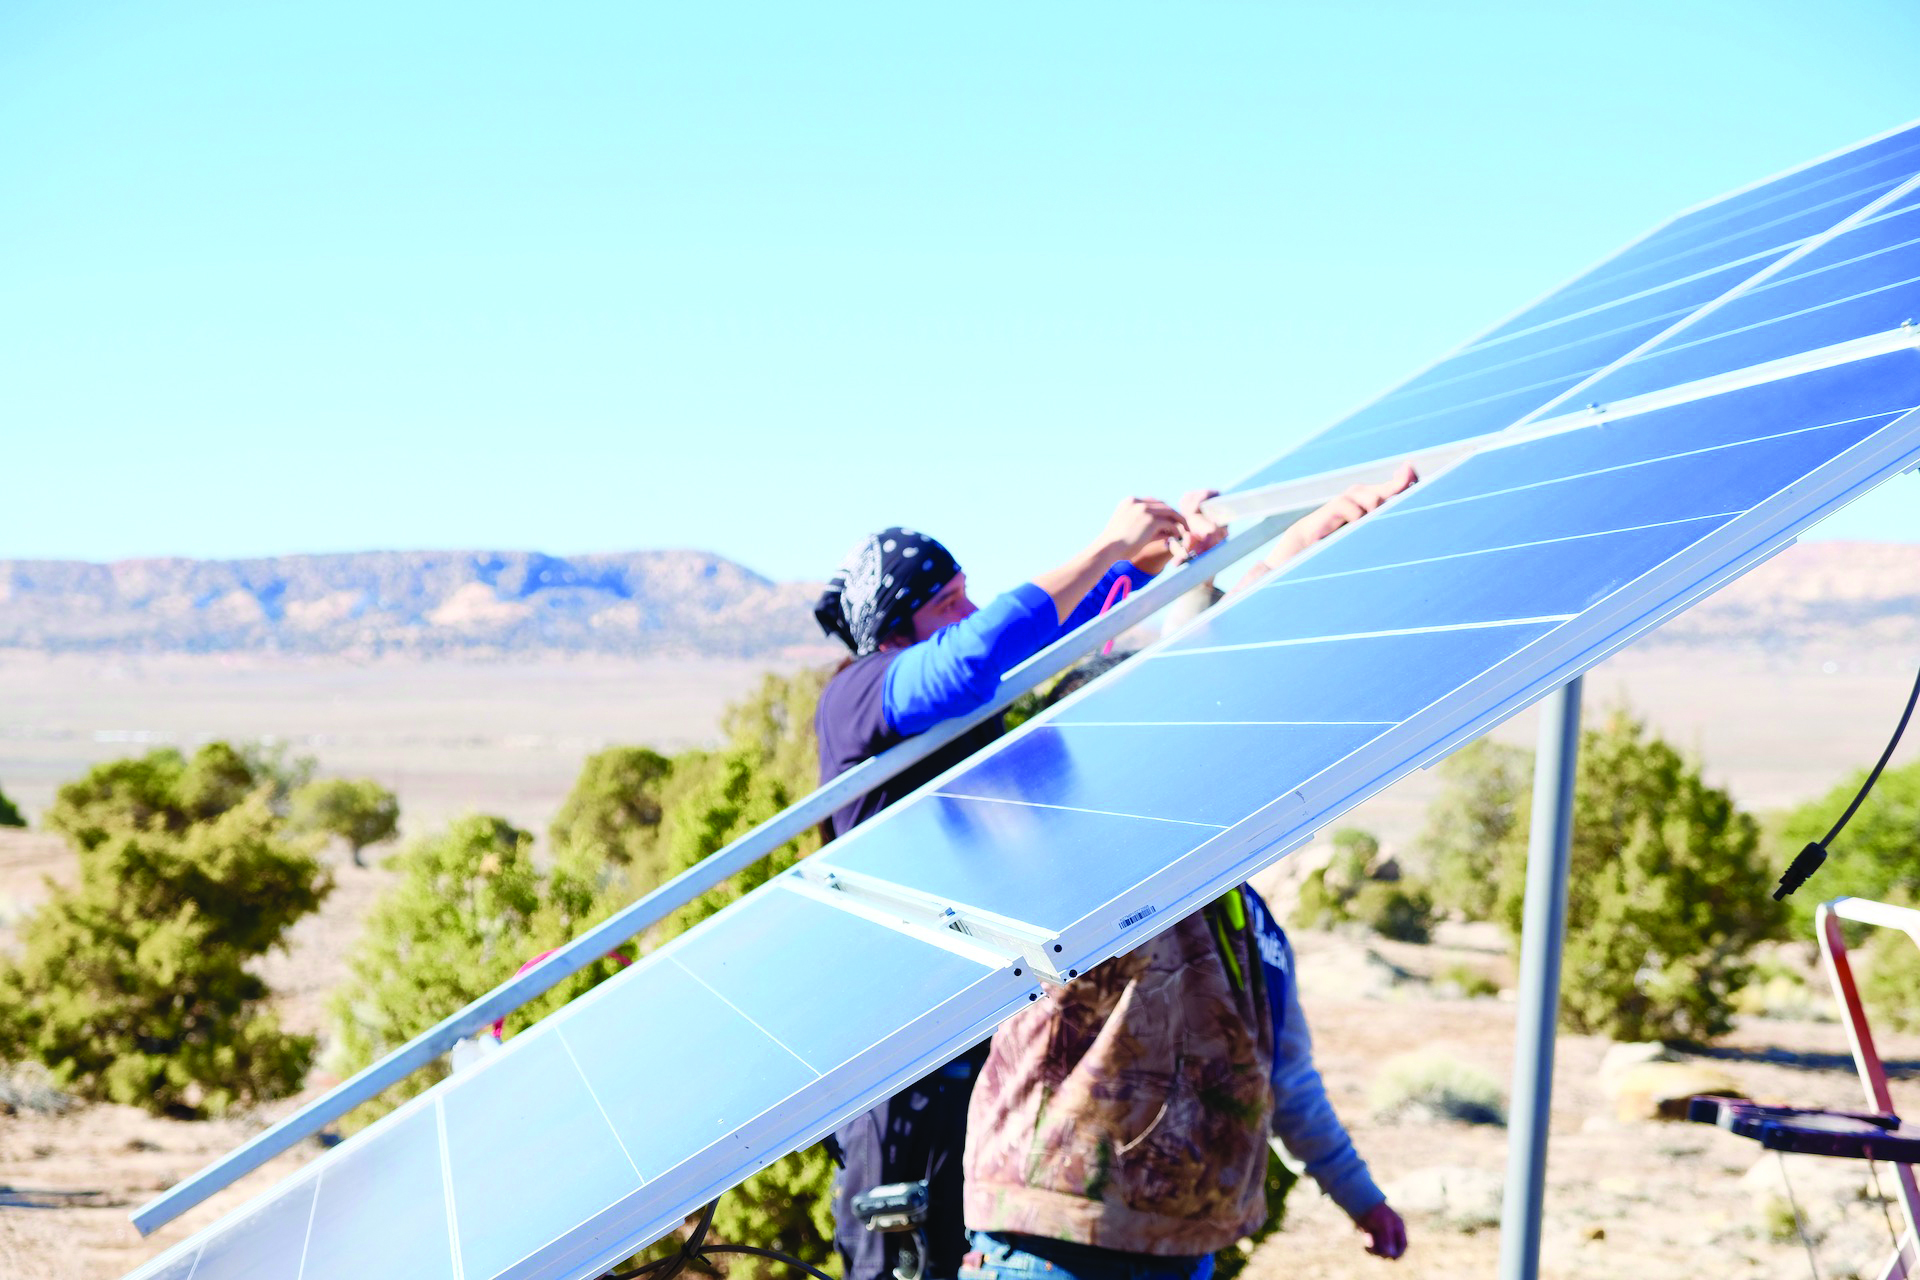 A photograph of two individuals working on a solar panel. The solar panel is seen from the side, dissecting the image from lower left to top right. The two individuals are behind and largely obscured by the panel. In the background is natural imagery of the Southwest of the United States.